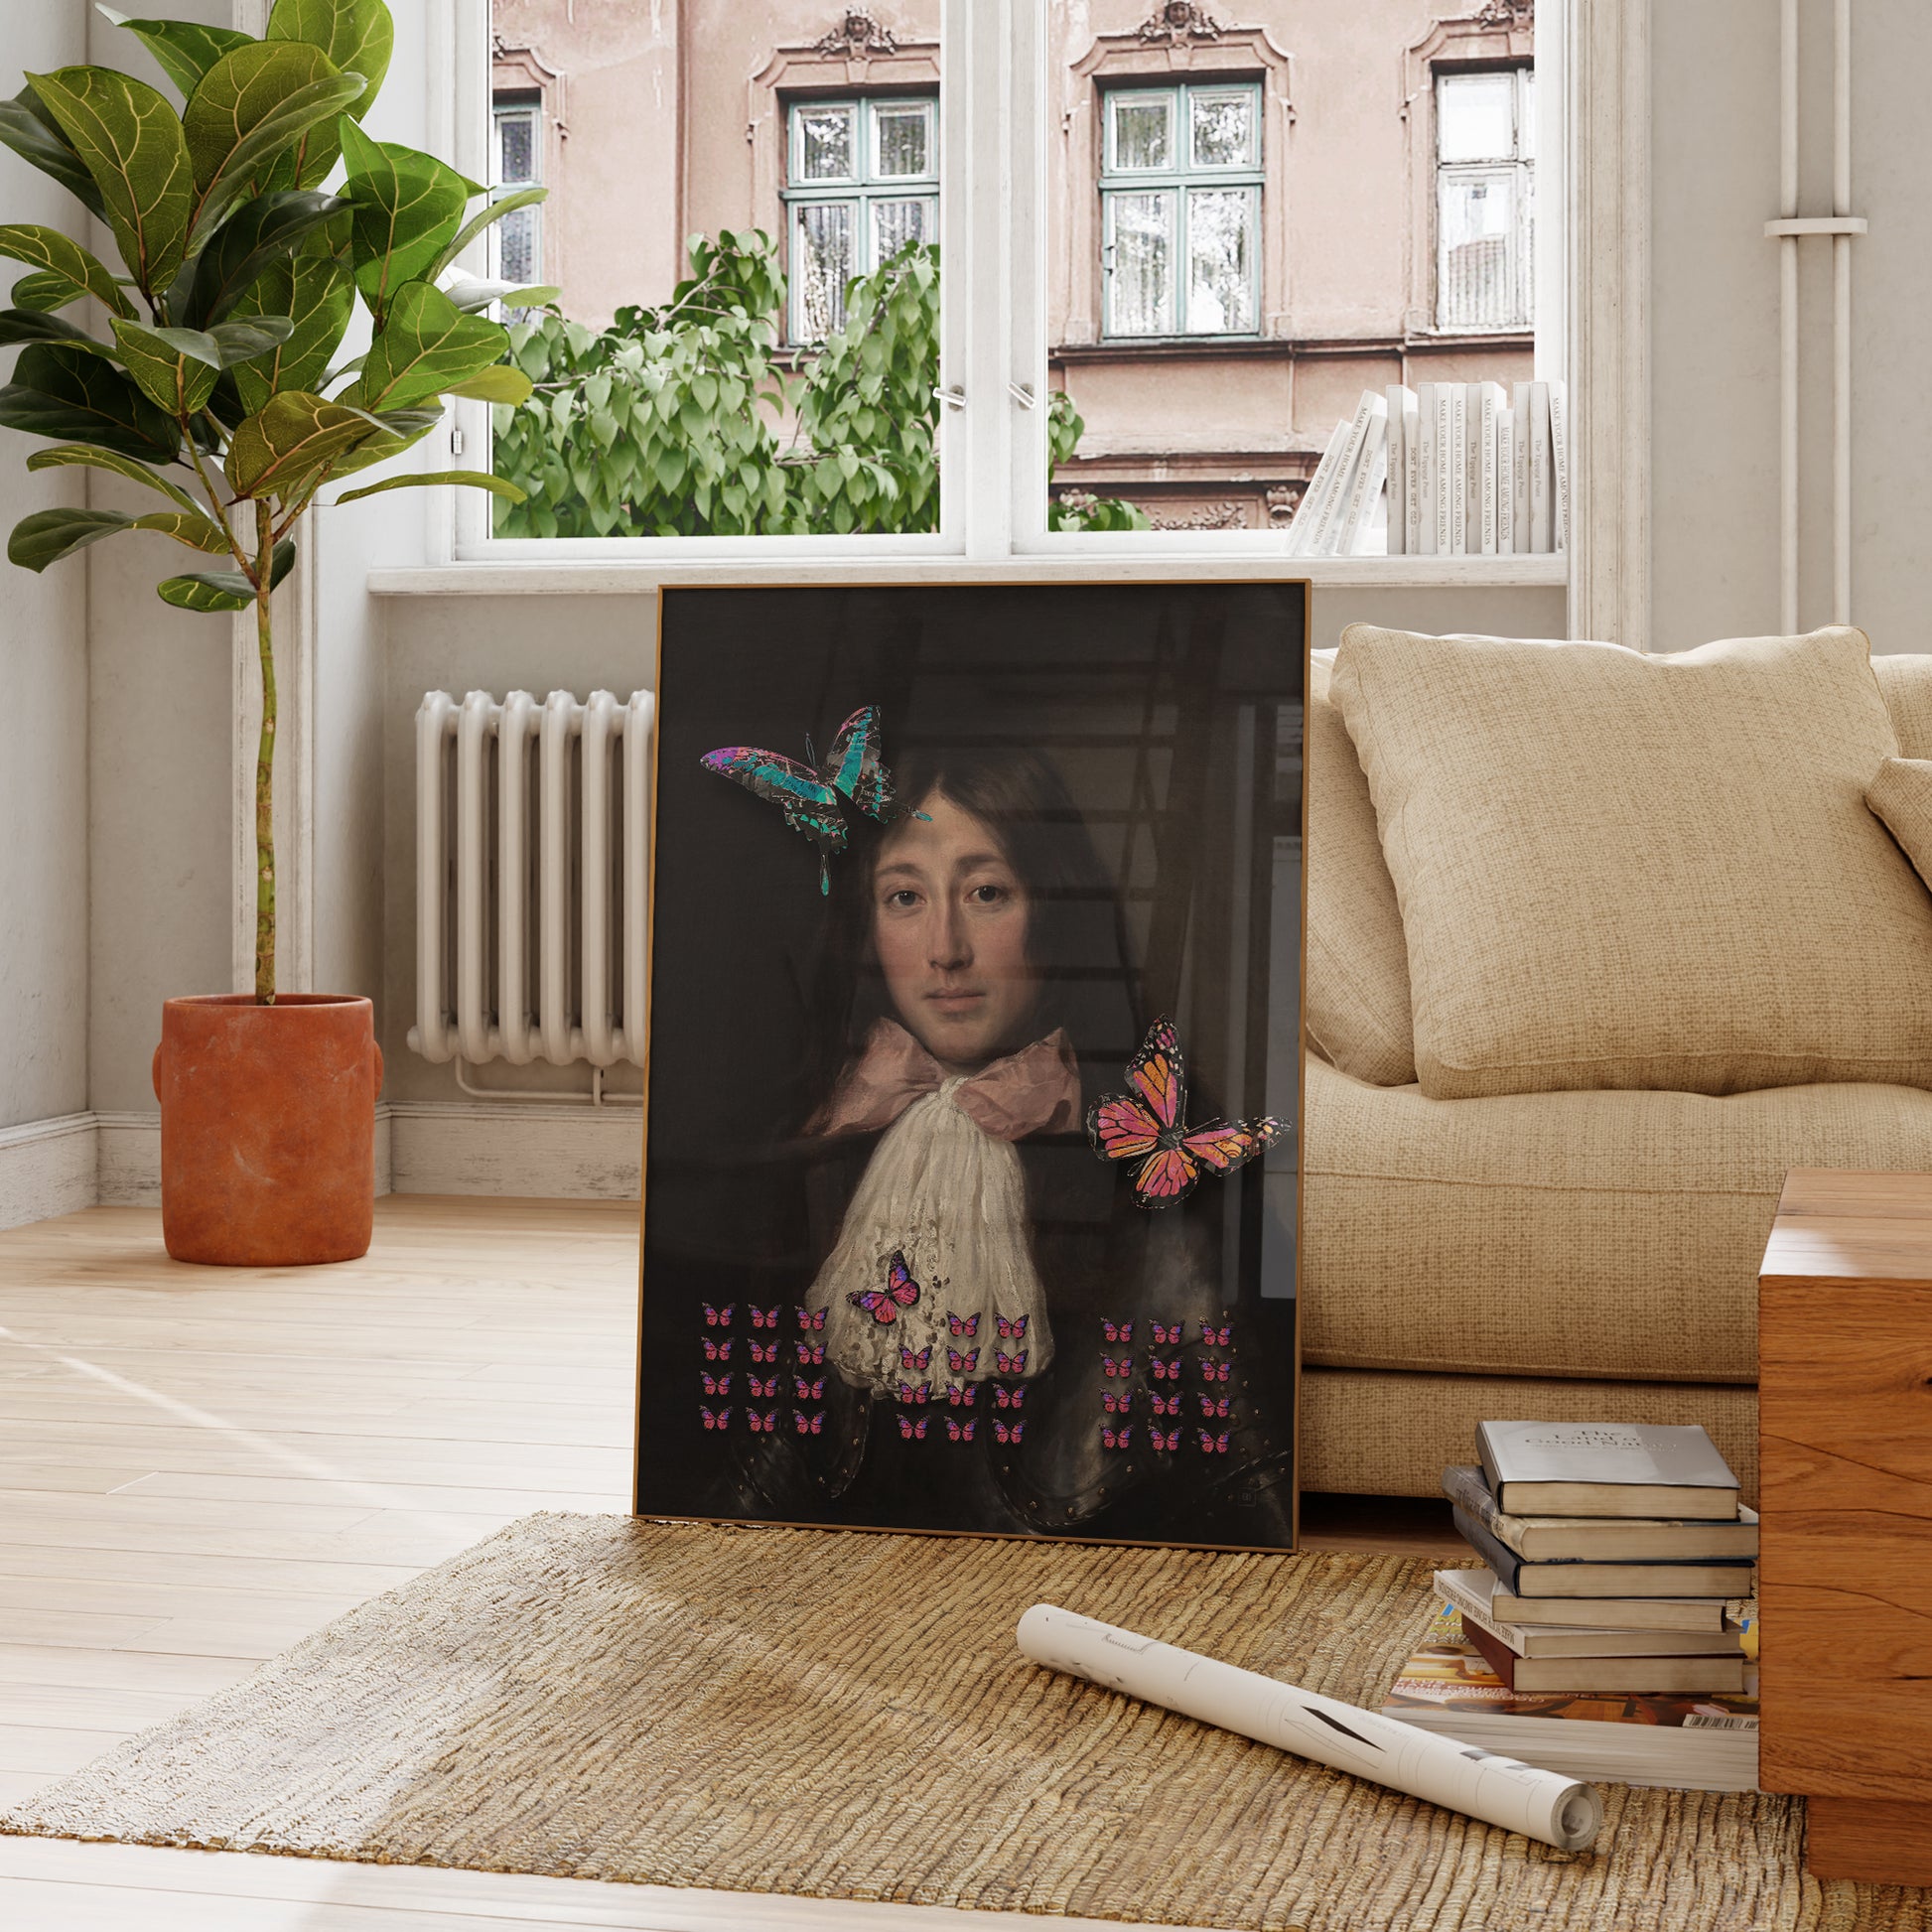 Be inspired by our altered soldier with pink tie and butterflies art print. This artwork was printed using the giclée process on archival acid-free paper and is presented in a french living room that captures its timeless beauty in every detail.